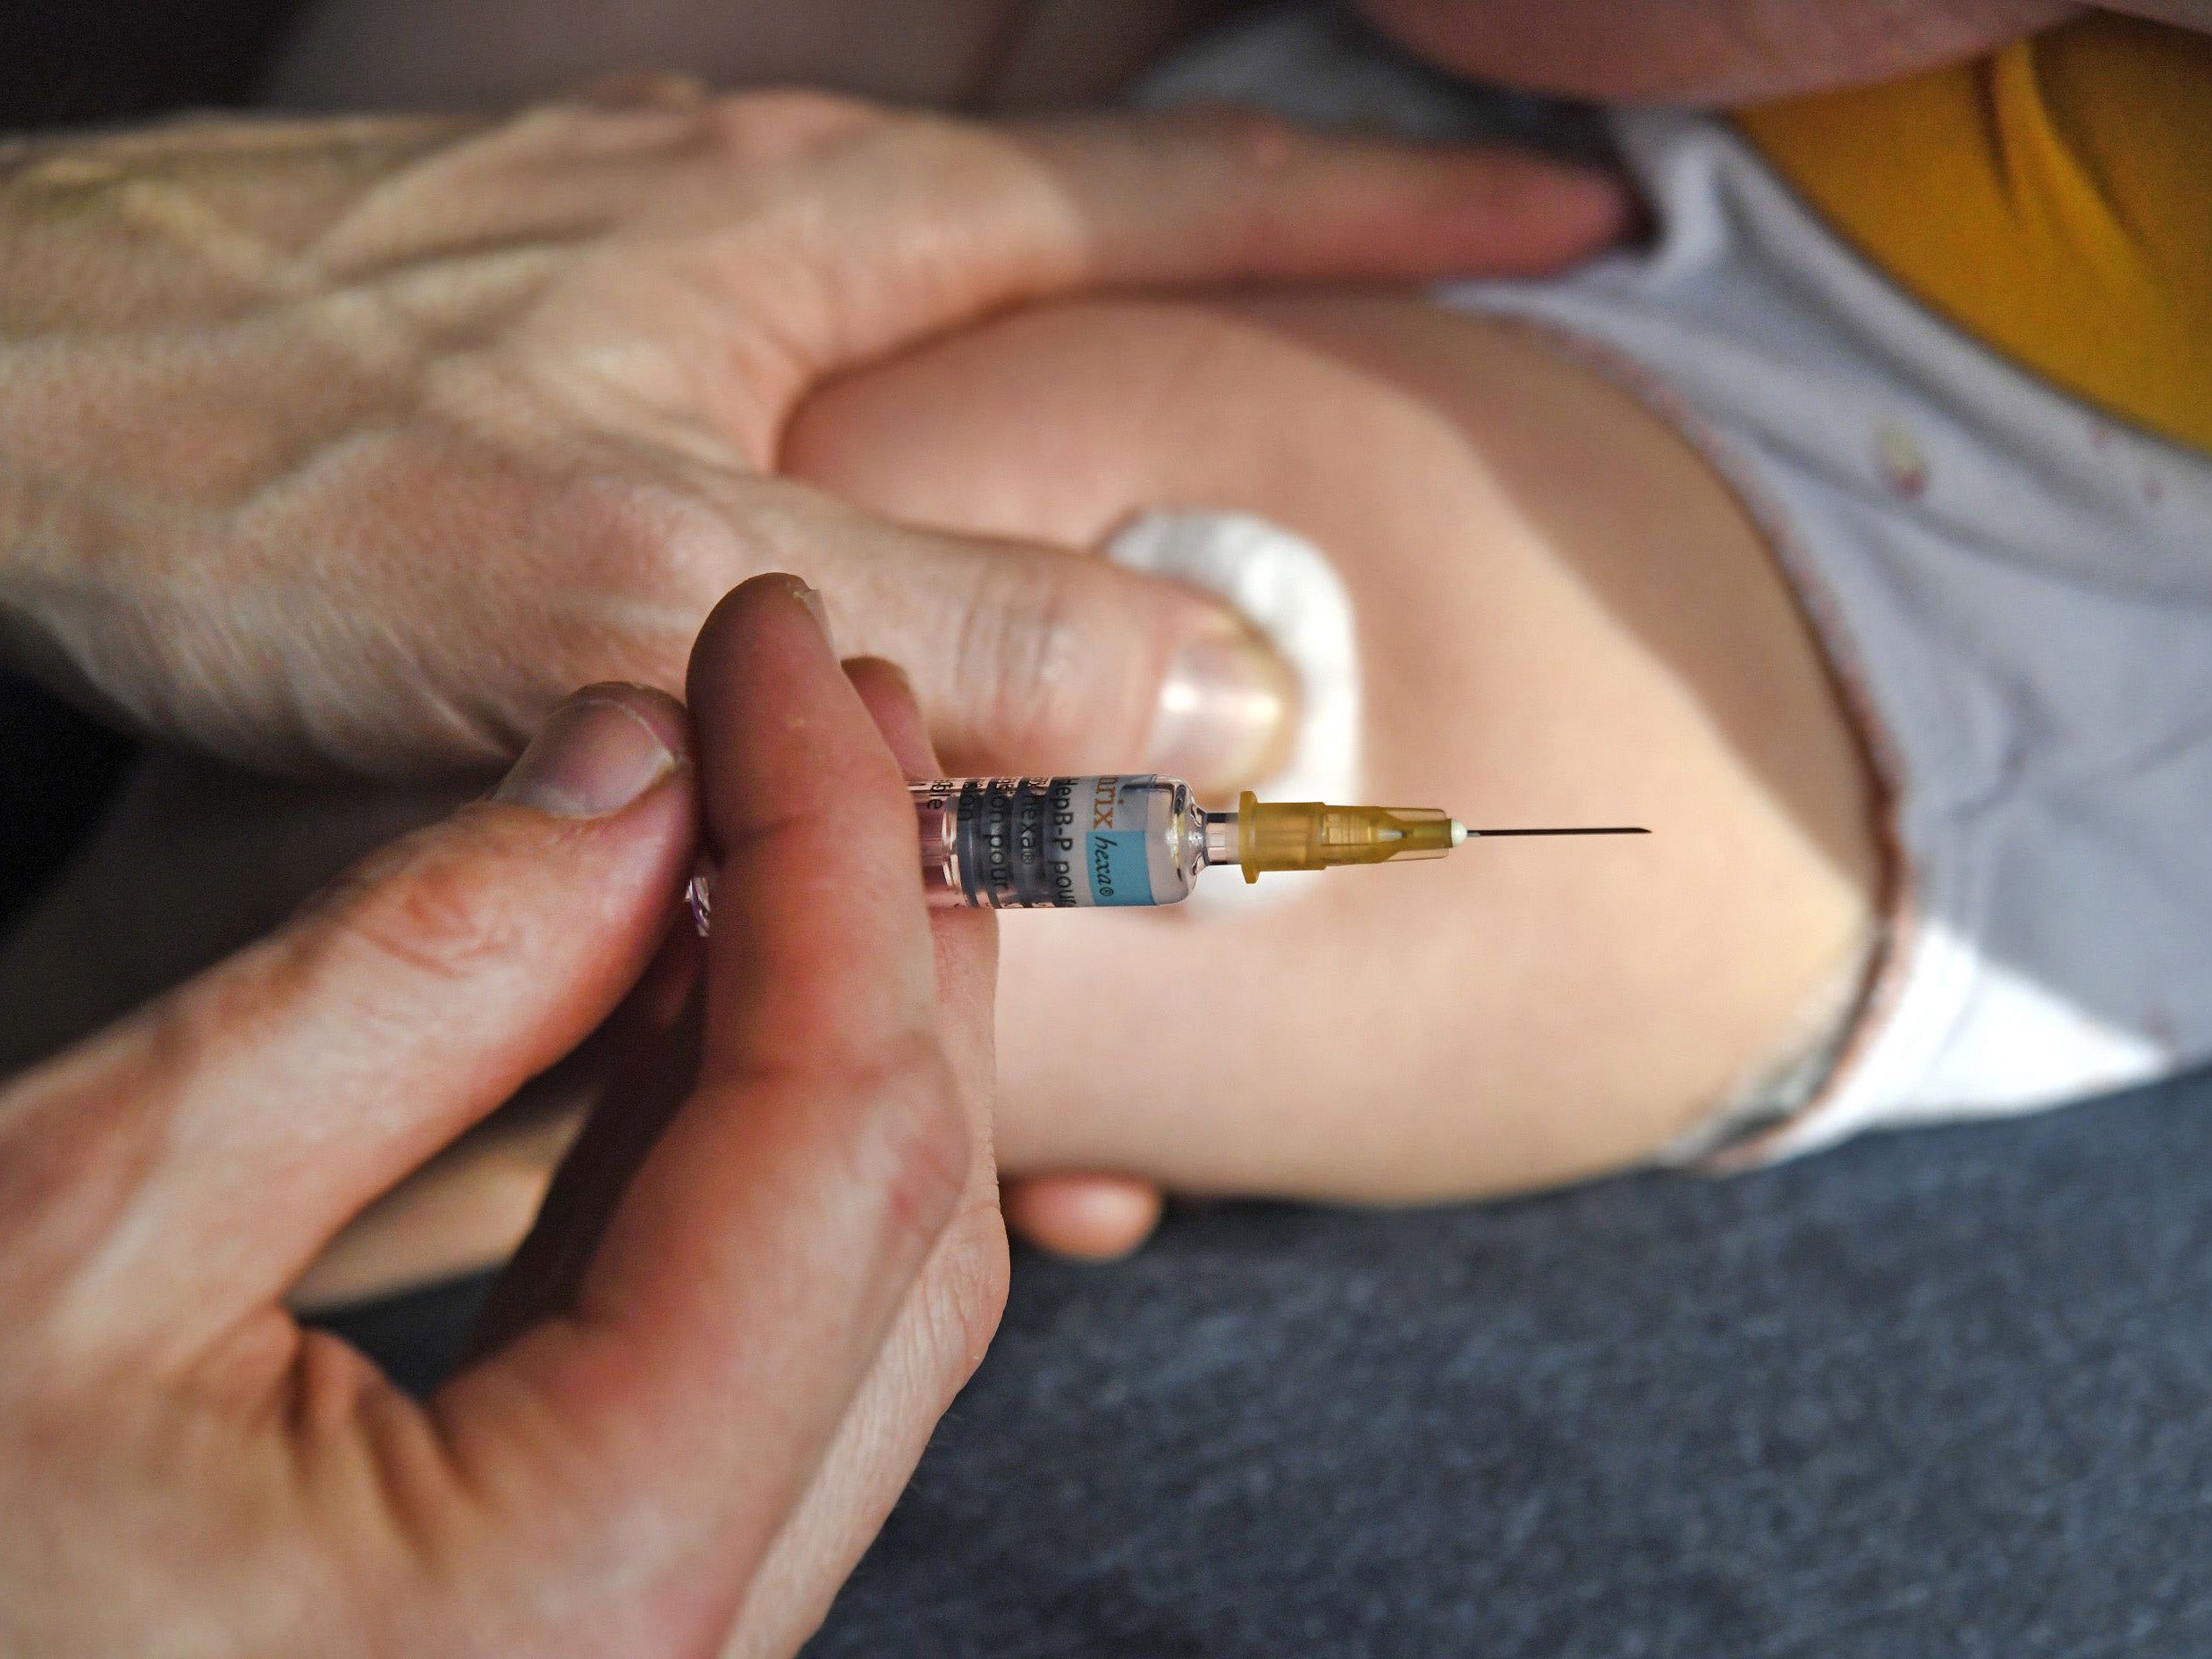 Report comes amid calls for UK to make vaccinations mandatory, though experts warn compulsion rarely leads to trust